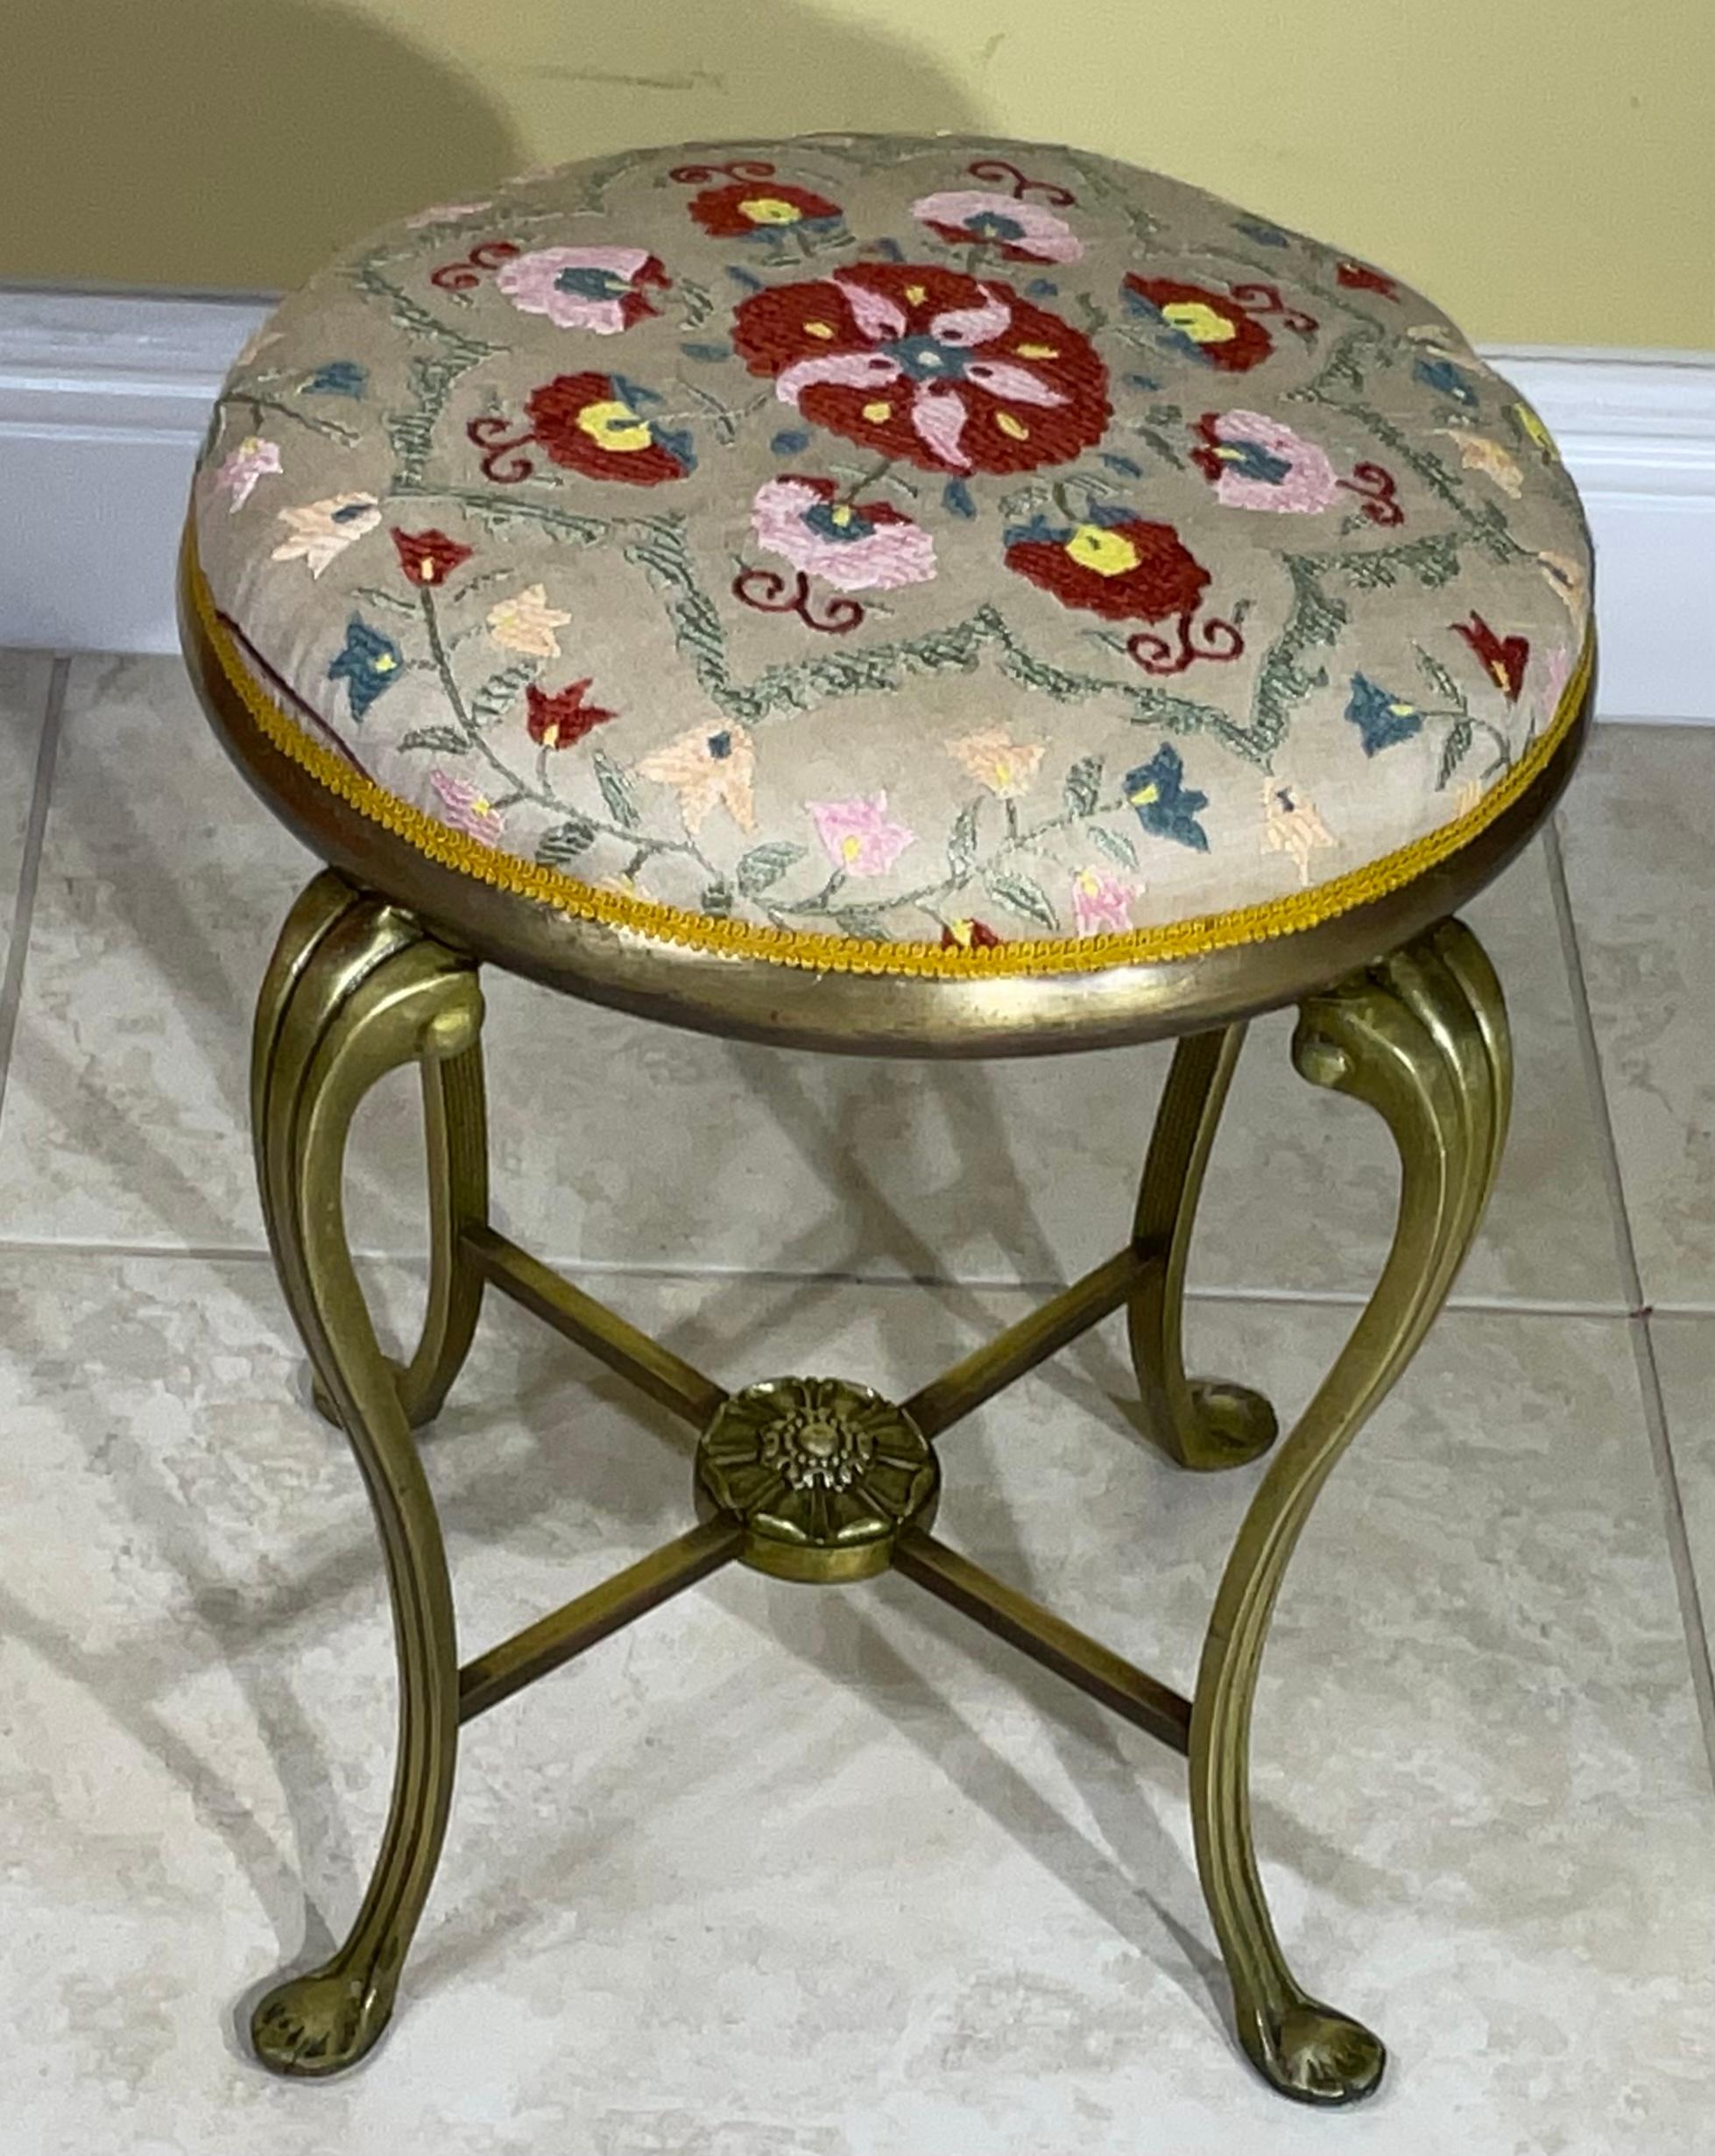 Exceptional vintage  foot stool made of solid brass  upholster with beautiful hand embroidery Suzani textile .
great object of art for display.